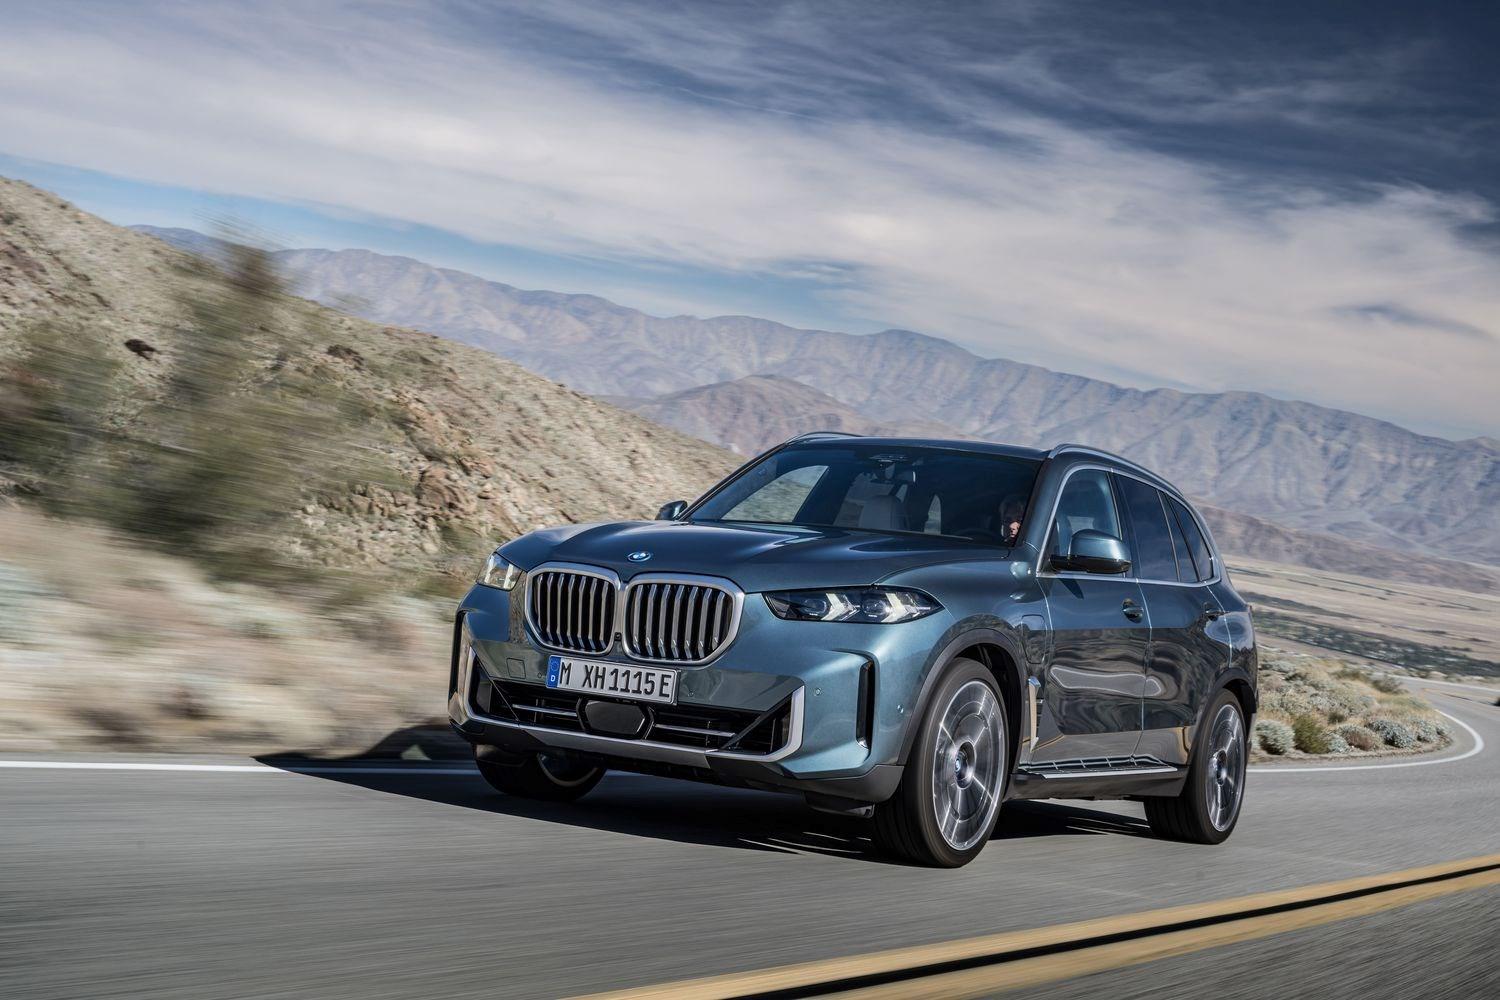 New BMW X5 image of vehicle driving